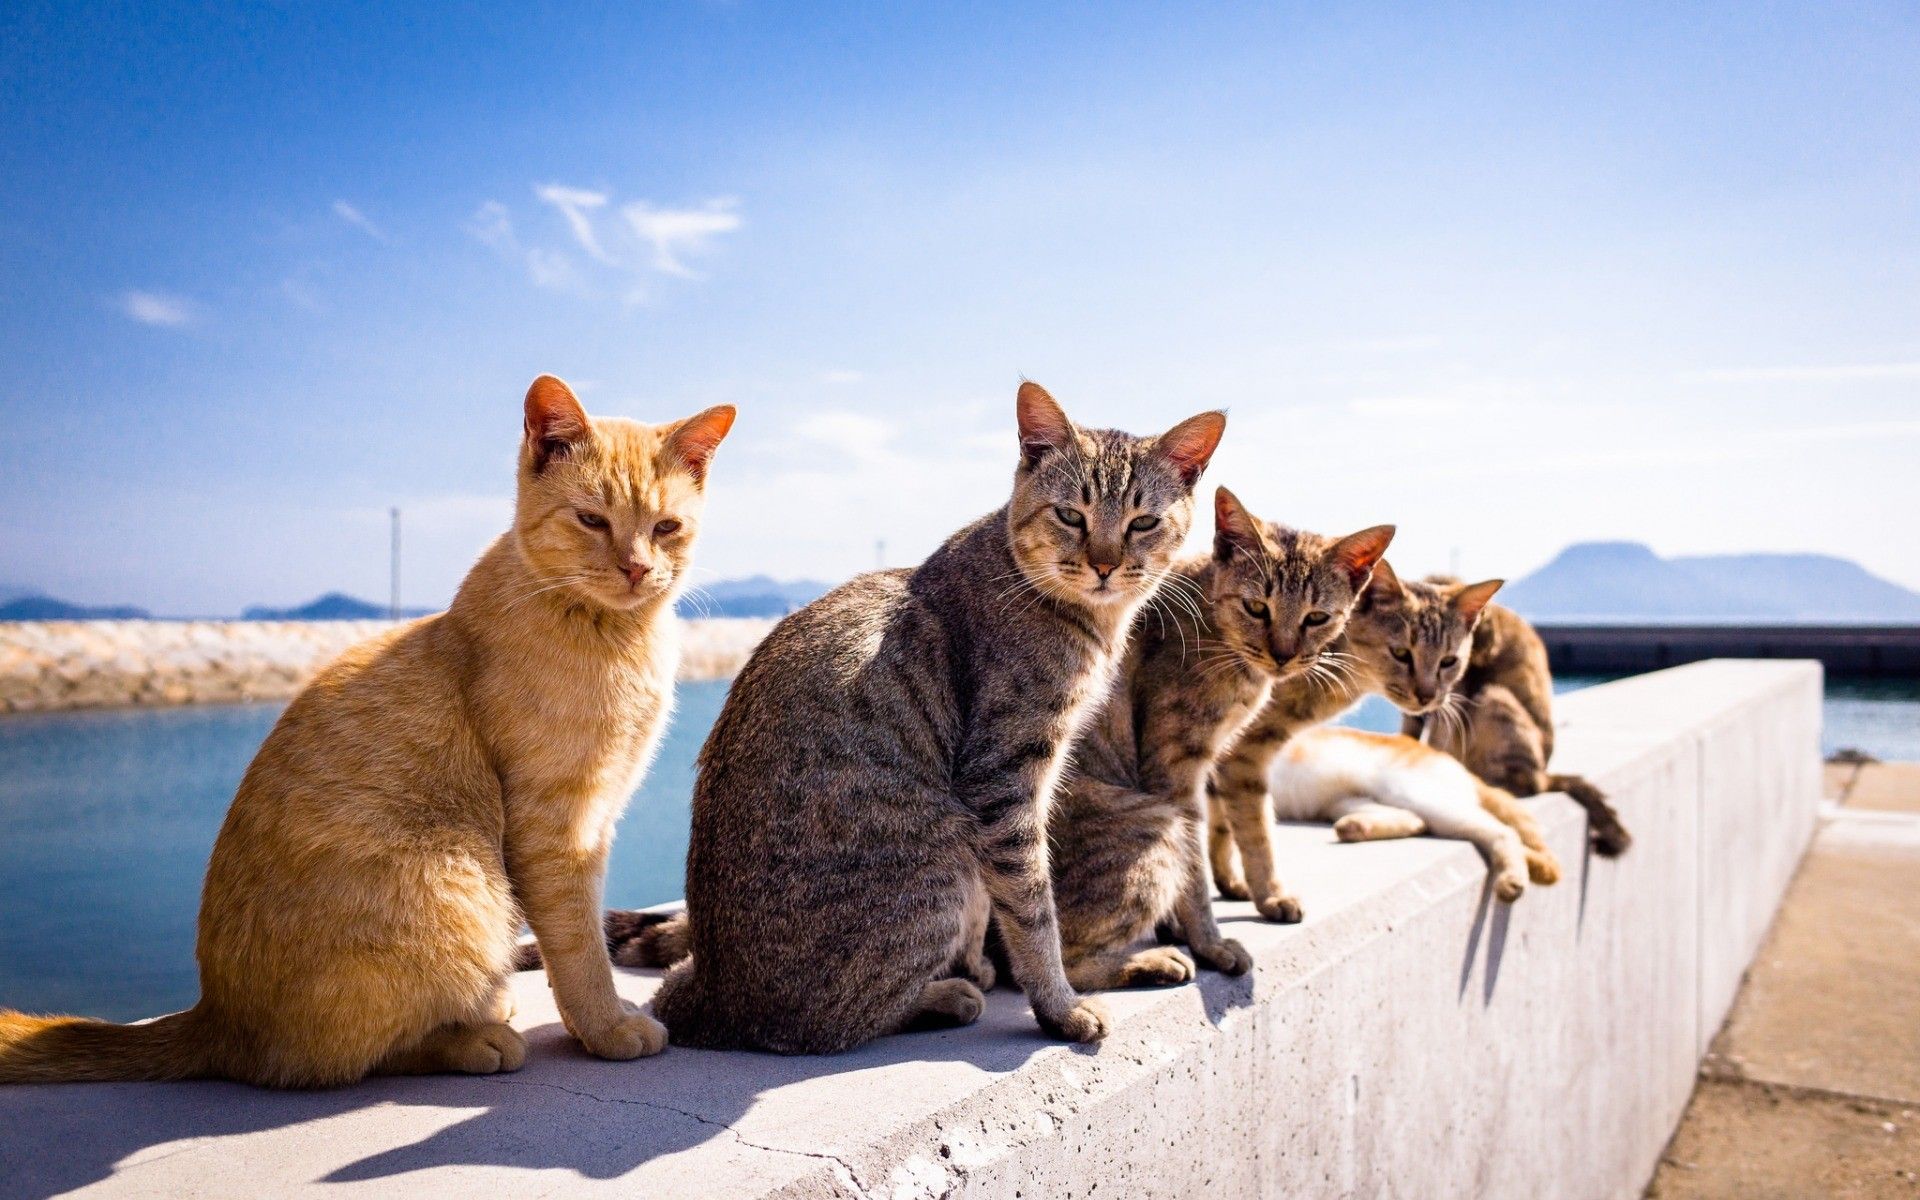 Cats relaxing at summer wallpaper download. Wallpaper, picture, photo